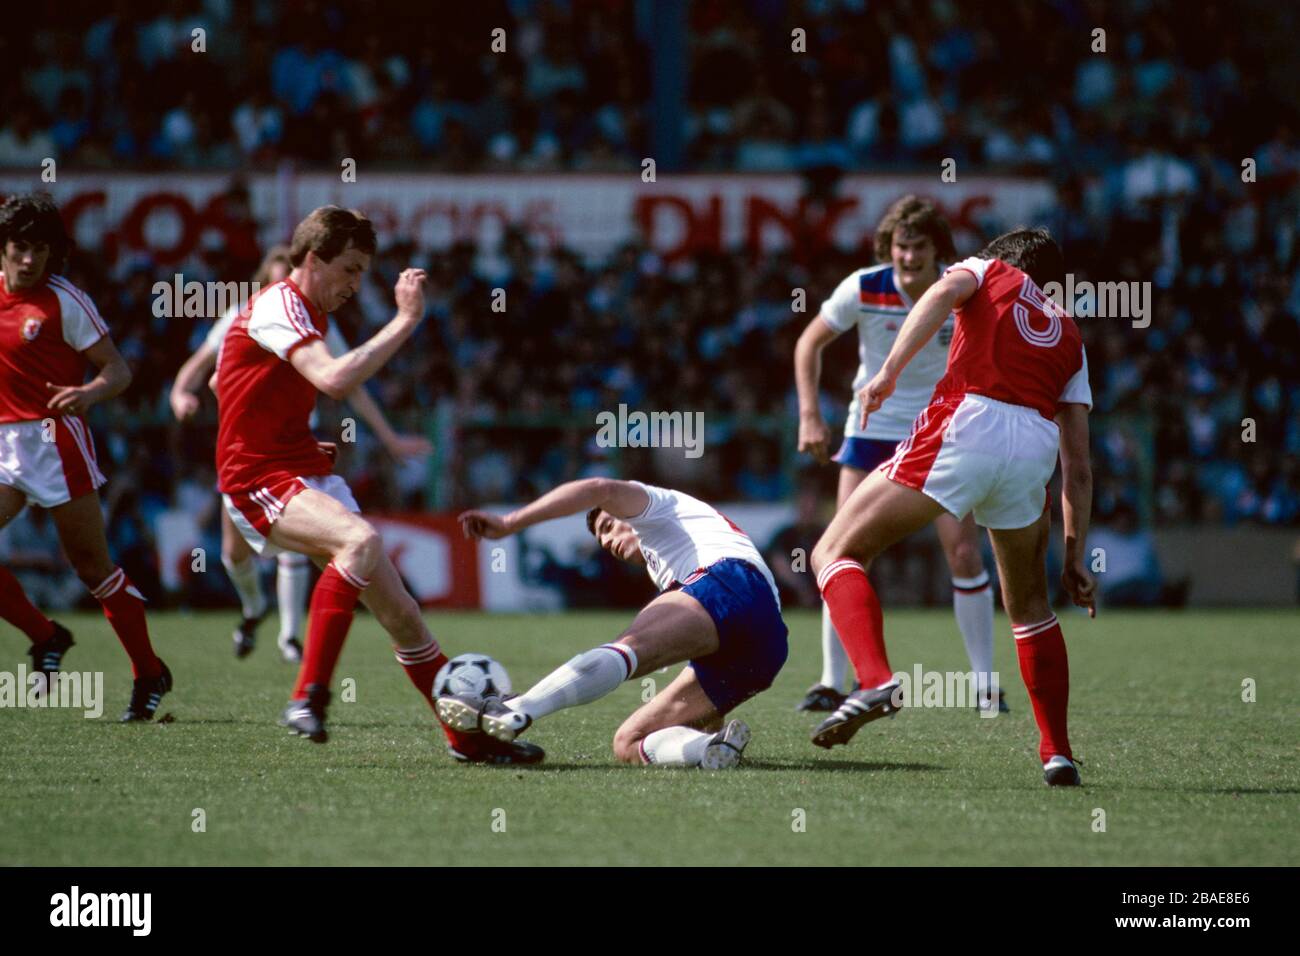 England's Trevor Brooking (c) battles for the ball with Wales's Joey Jones (l) Stock Photo